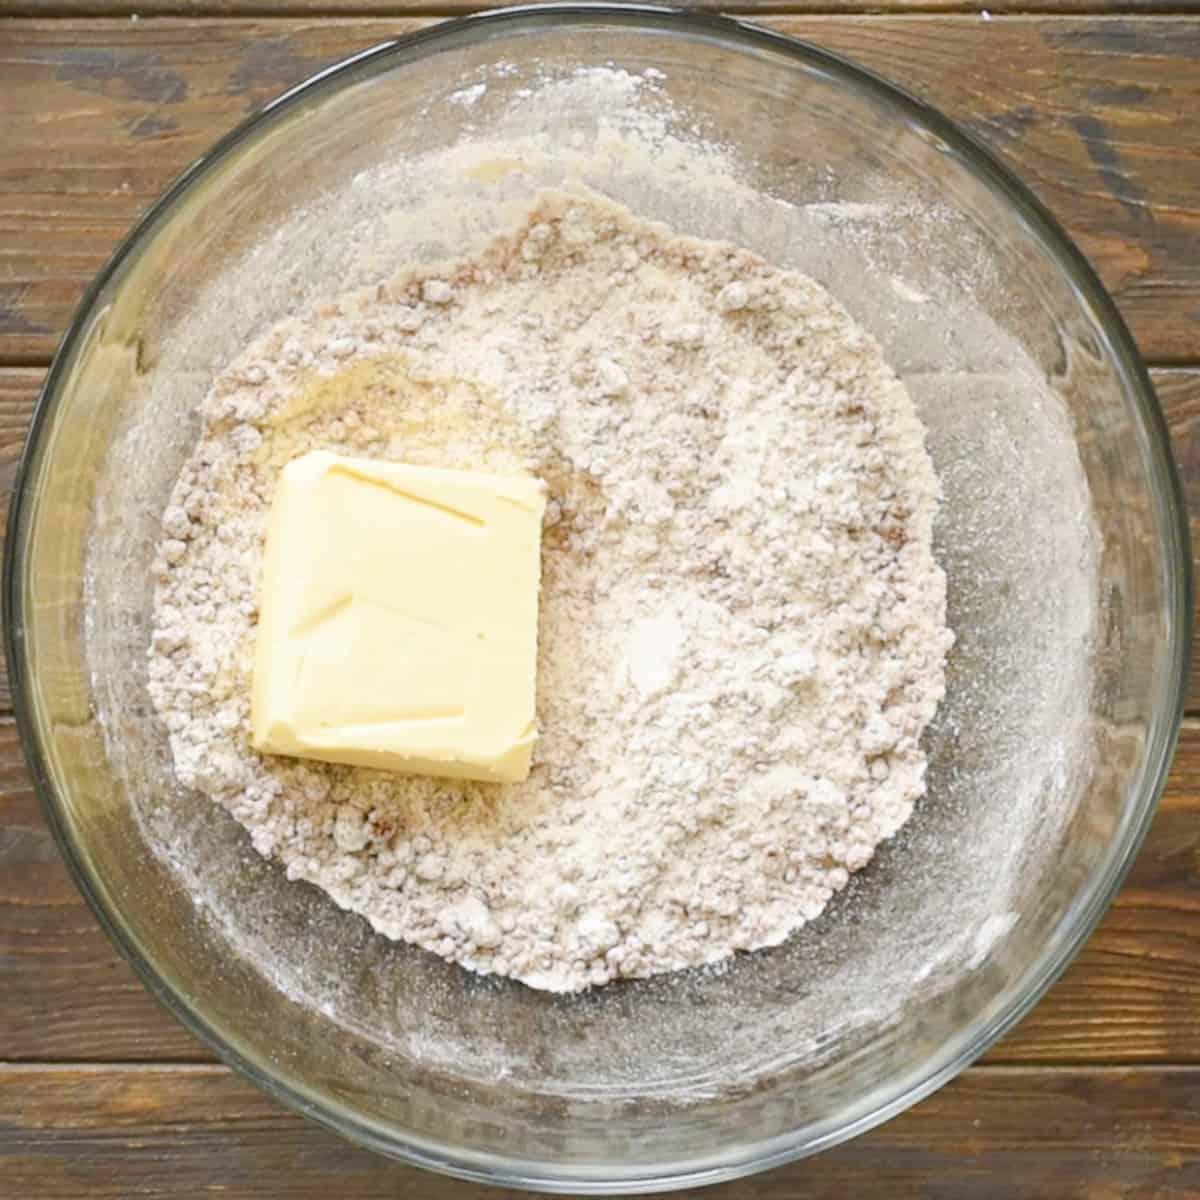 Adding butter to flour sugar mixture for apple brown betty recipe.